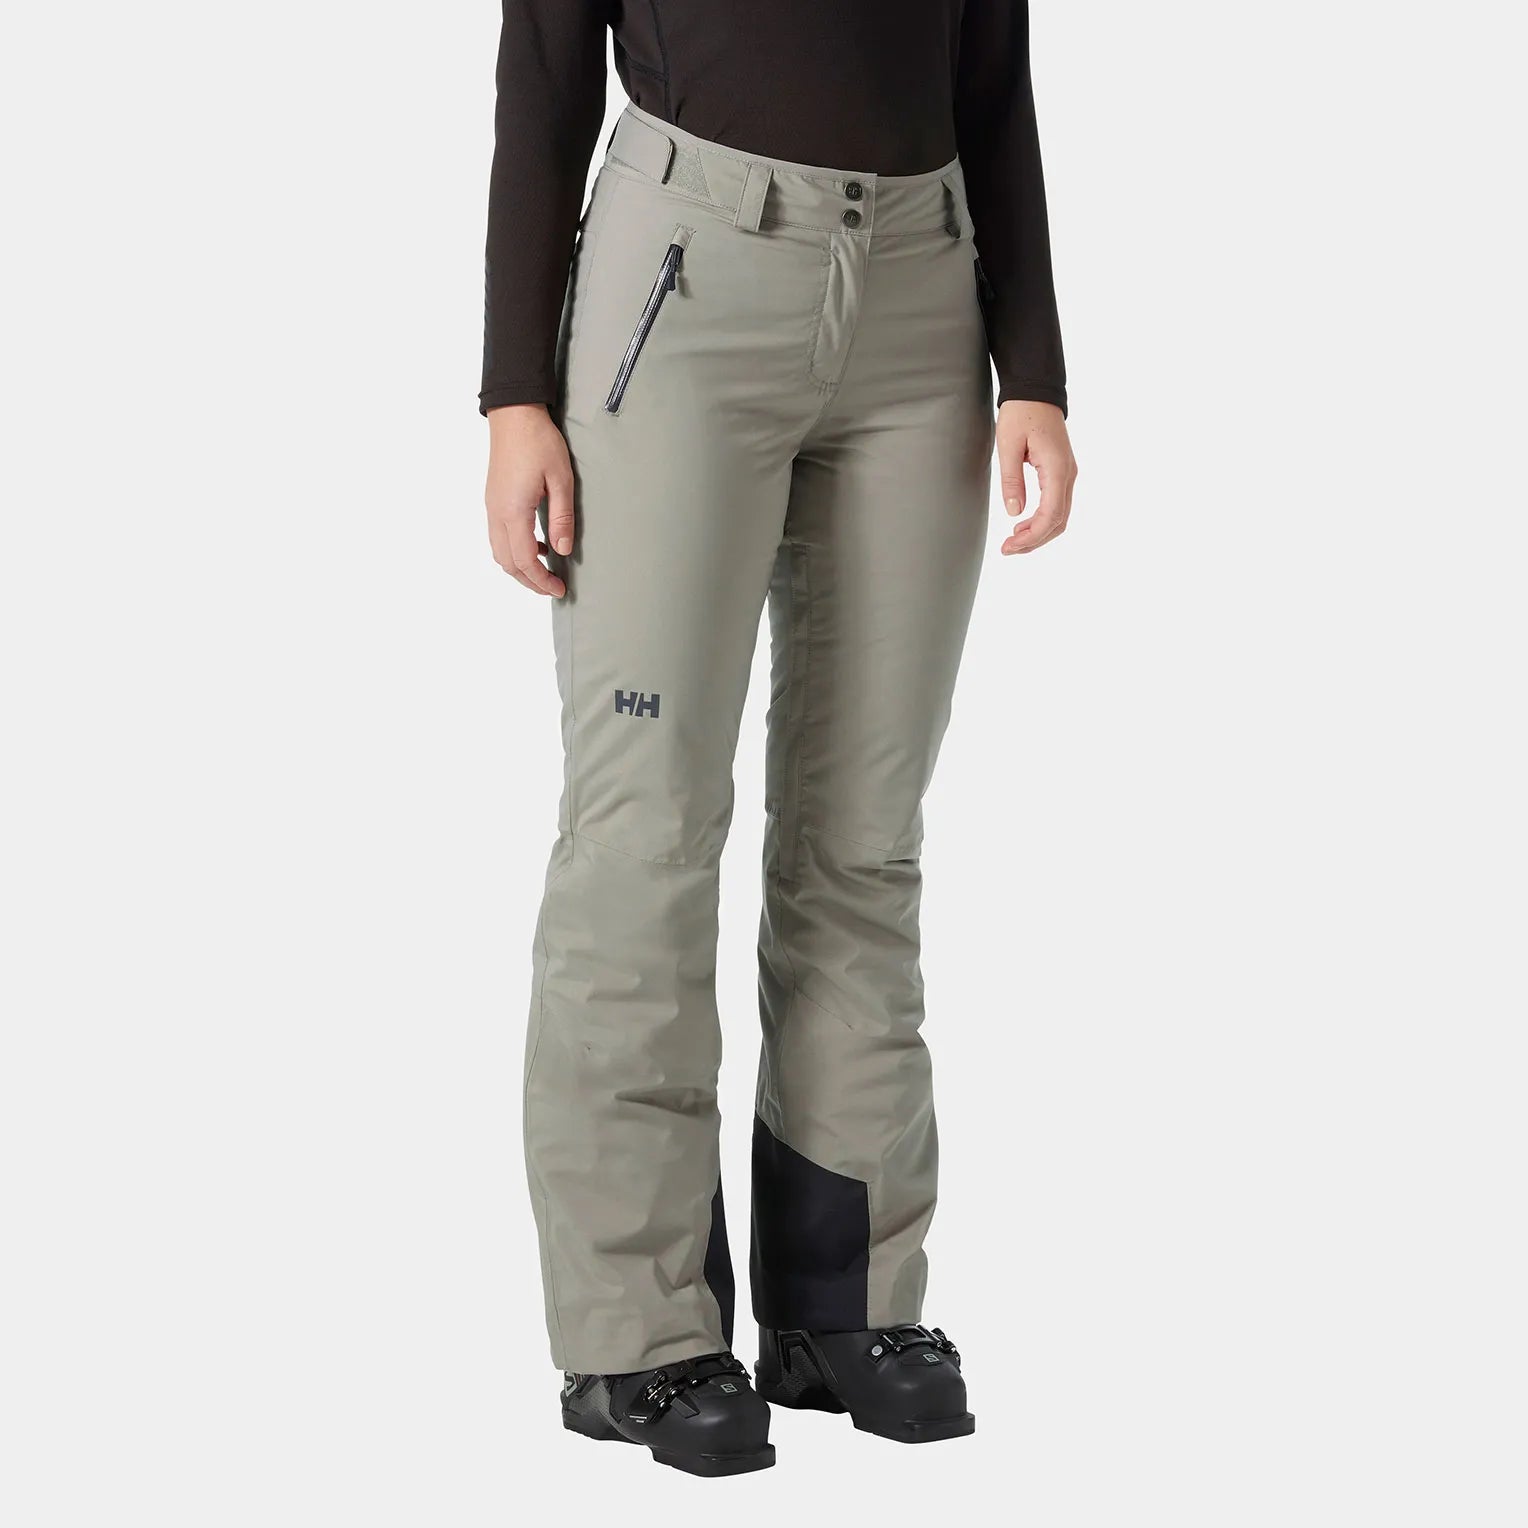 Helly Hansen Women's Legendary Insulated Pant, Alpine Country Lodge